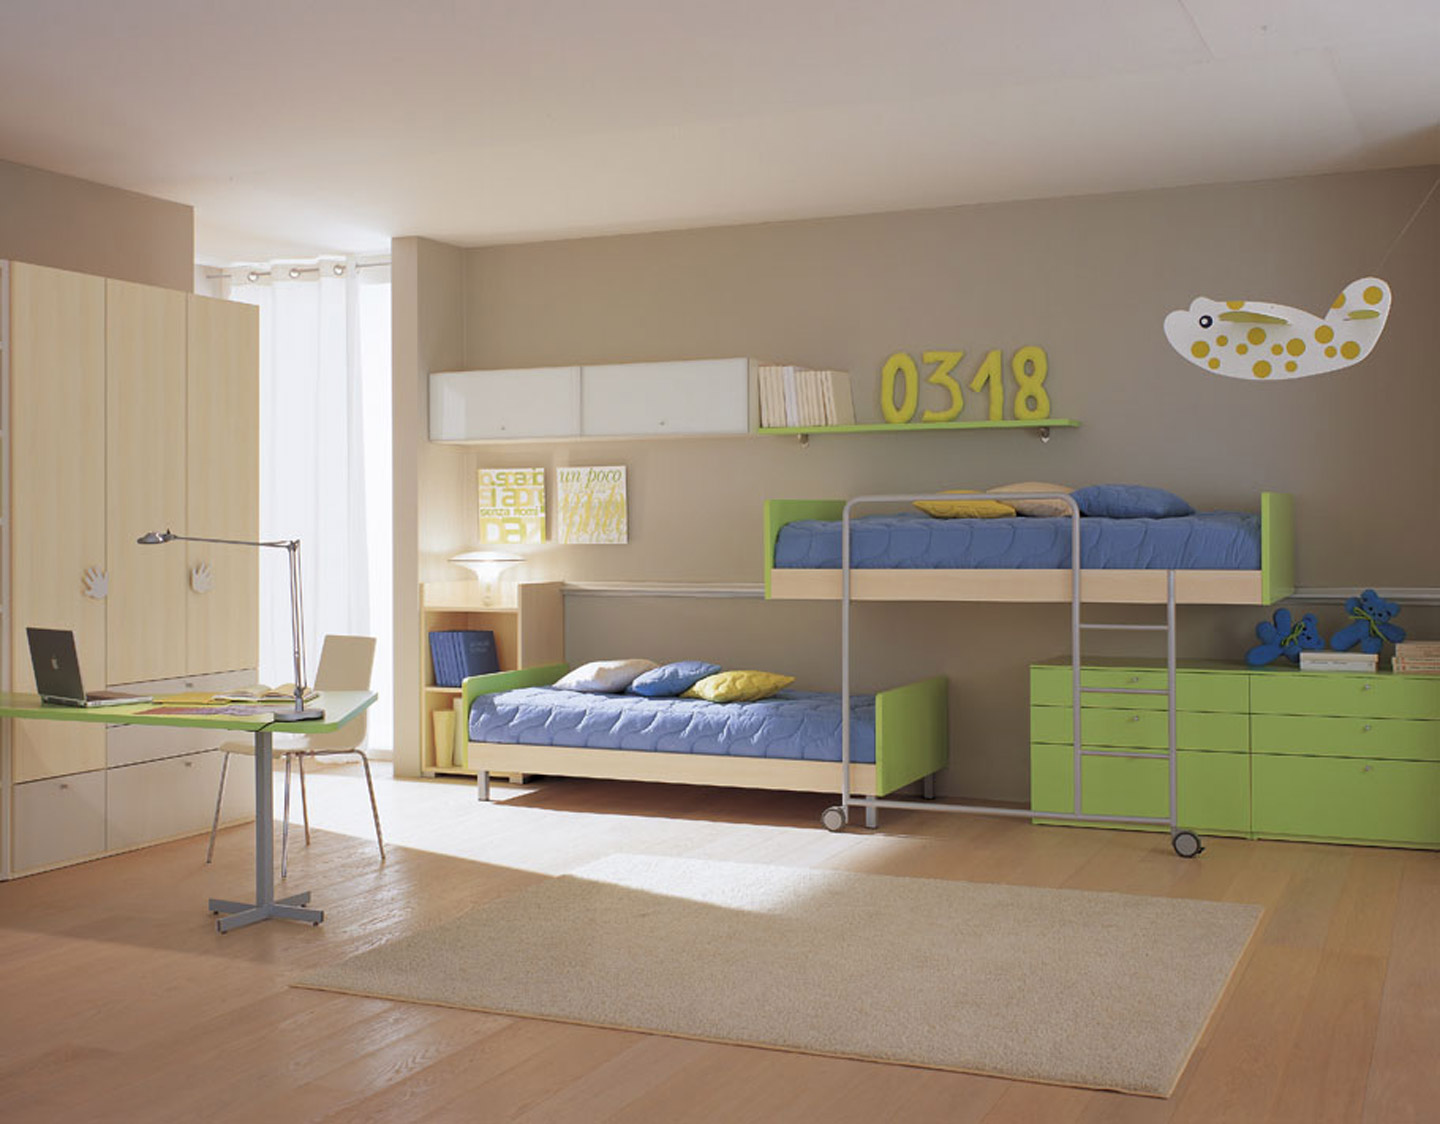 Kids Bedroom Storage Outstanding Kids Bedroom Furniture With Storage For Boys With Creative Wooden Bunk Bed Design And White Thick Fur Carpet IKEA Plus Traditional Light Wood Flooring Ideas Choosing The Kids Bedroom Furniture